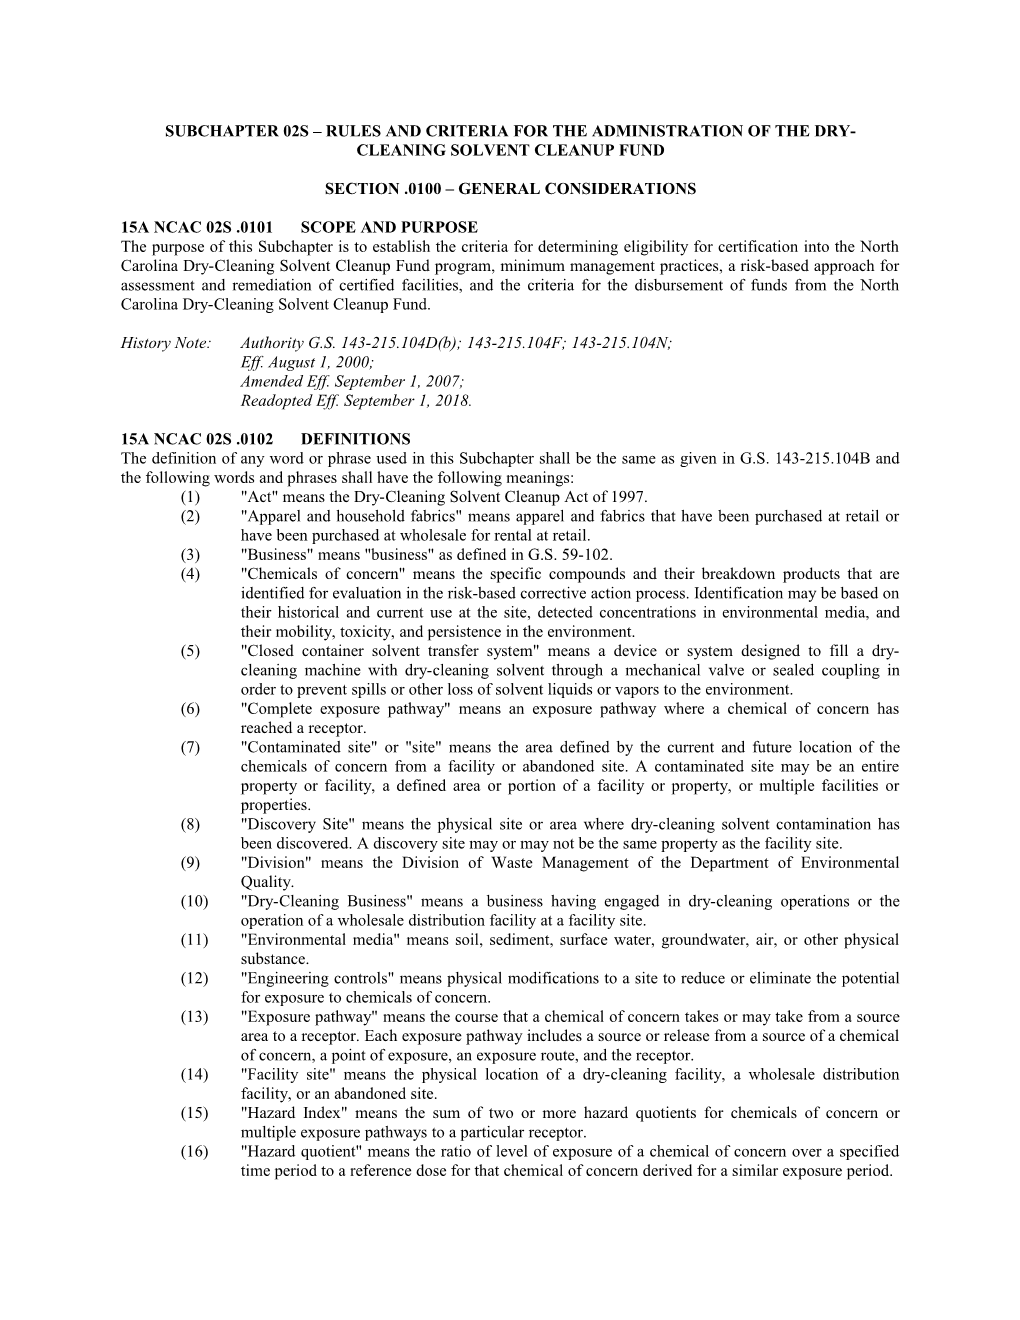 Subchapter 02S Rules and Criteria for the Administration of the Dry-Cleaning Solvent Cleanup